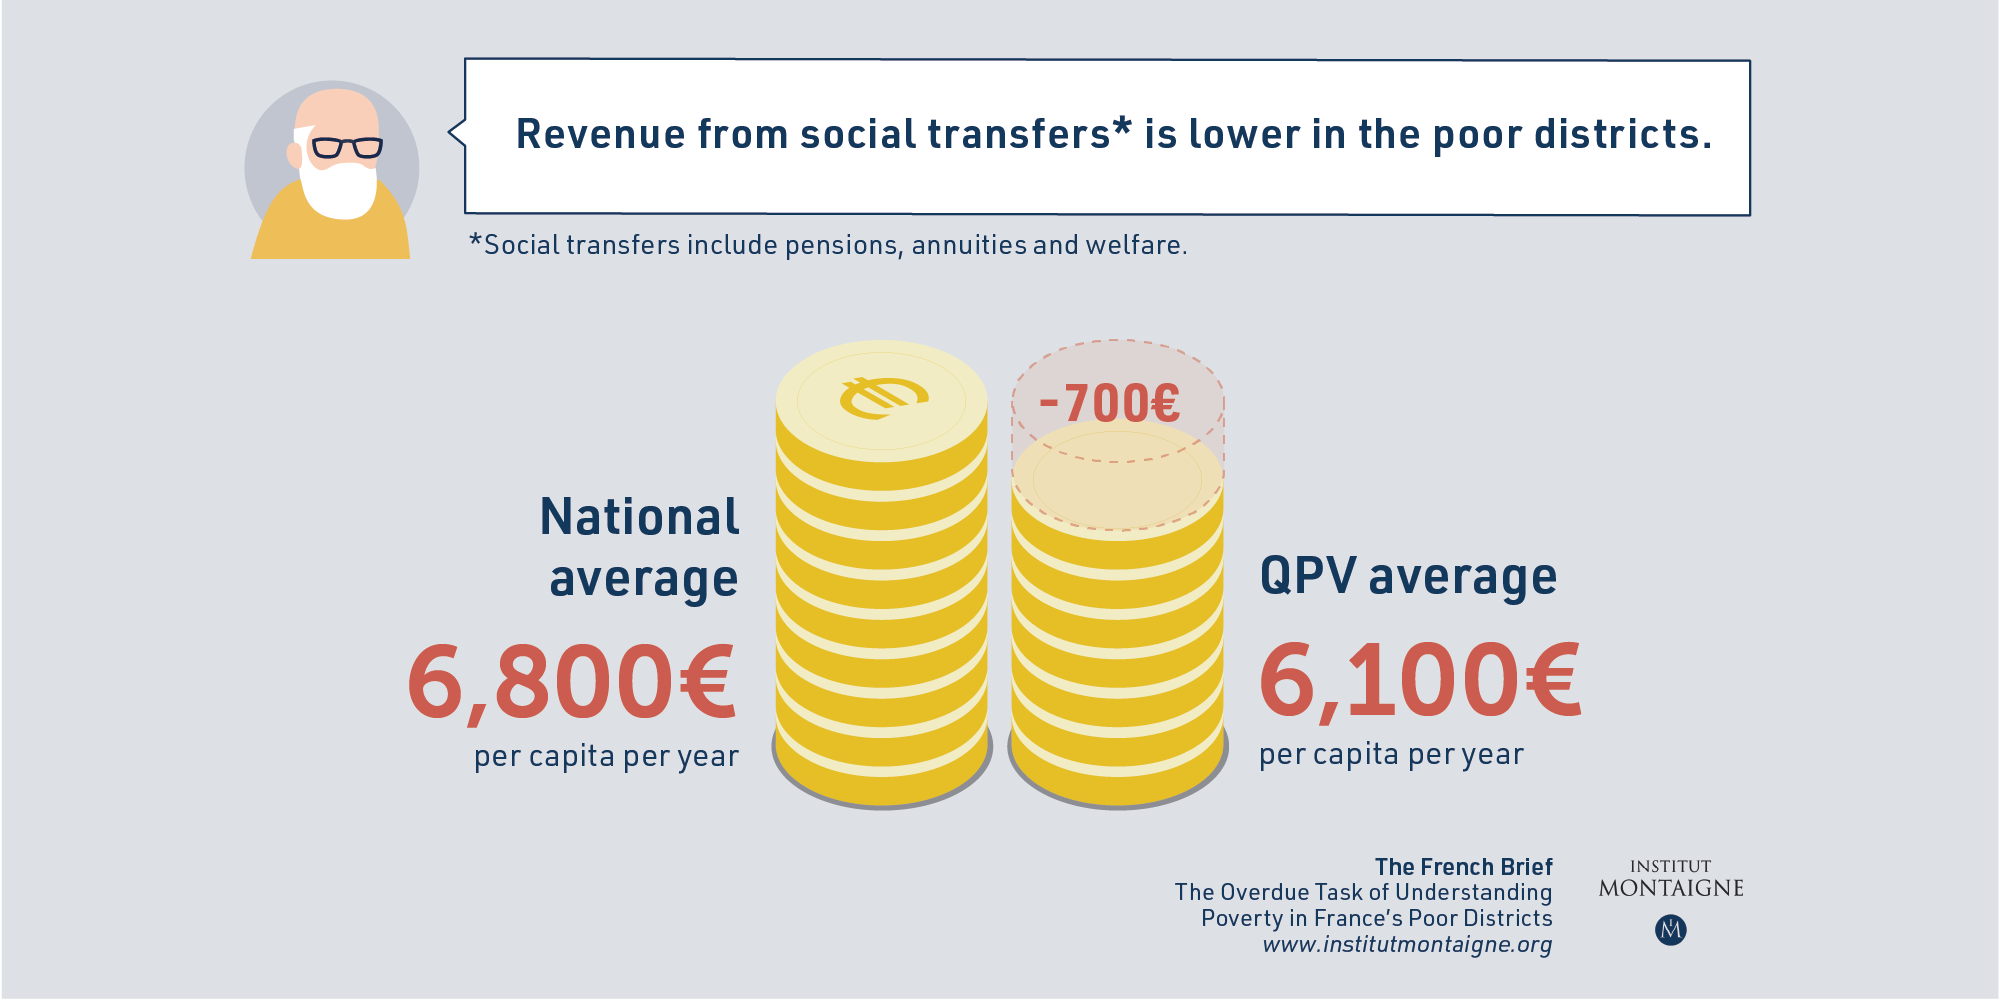 Revenue from social transfers is lower in the poor districts